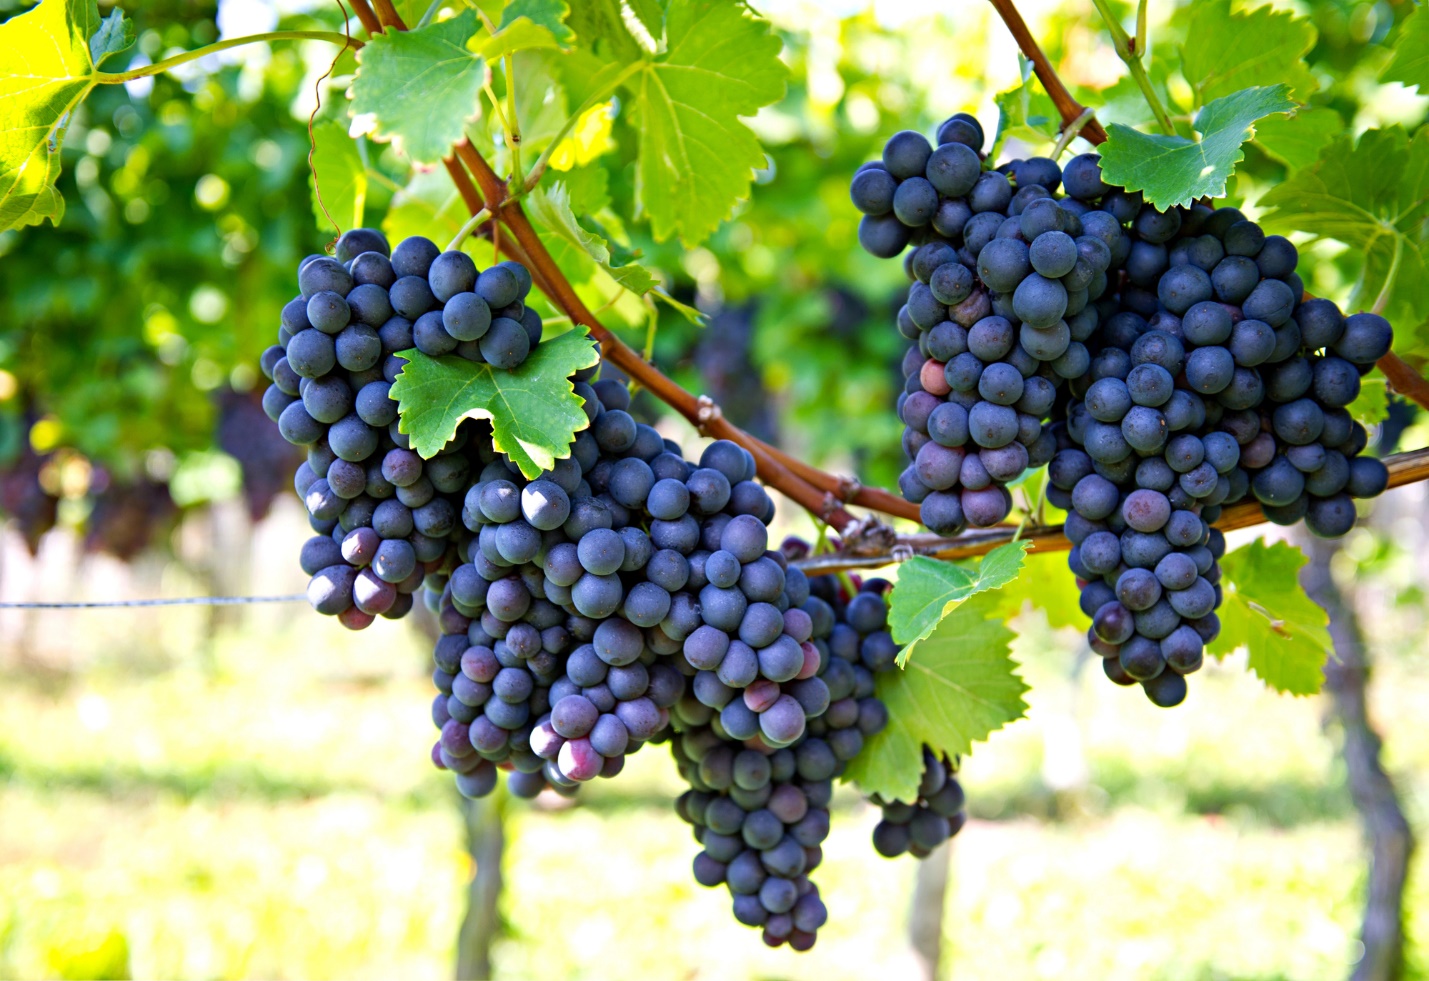 A bunches of grapes on a vine

Description automatically generated